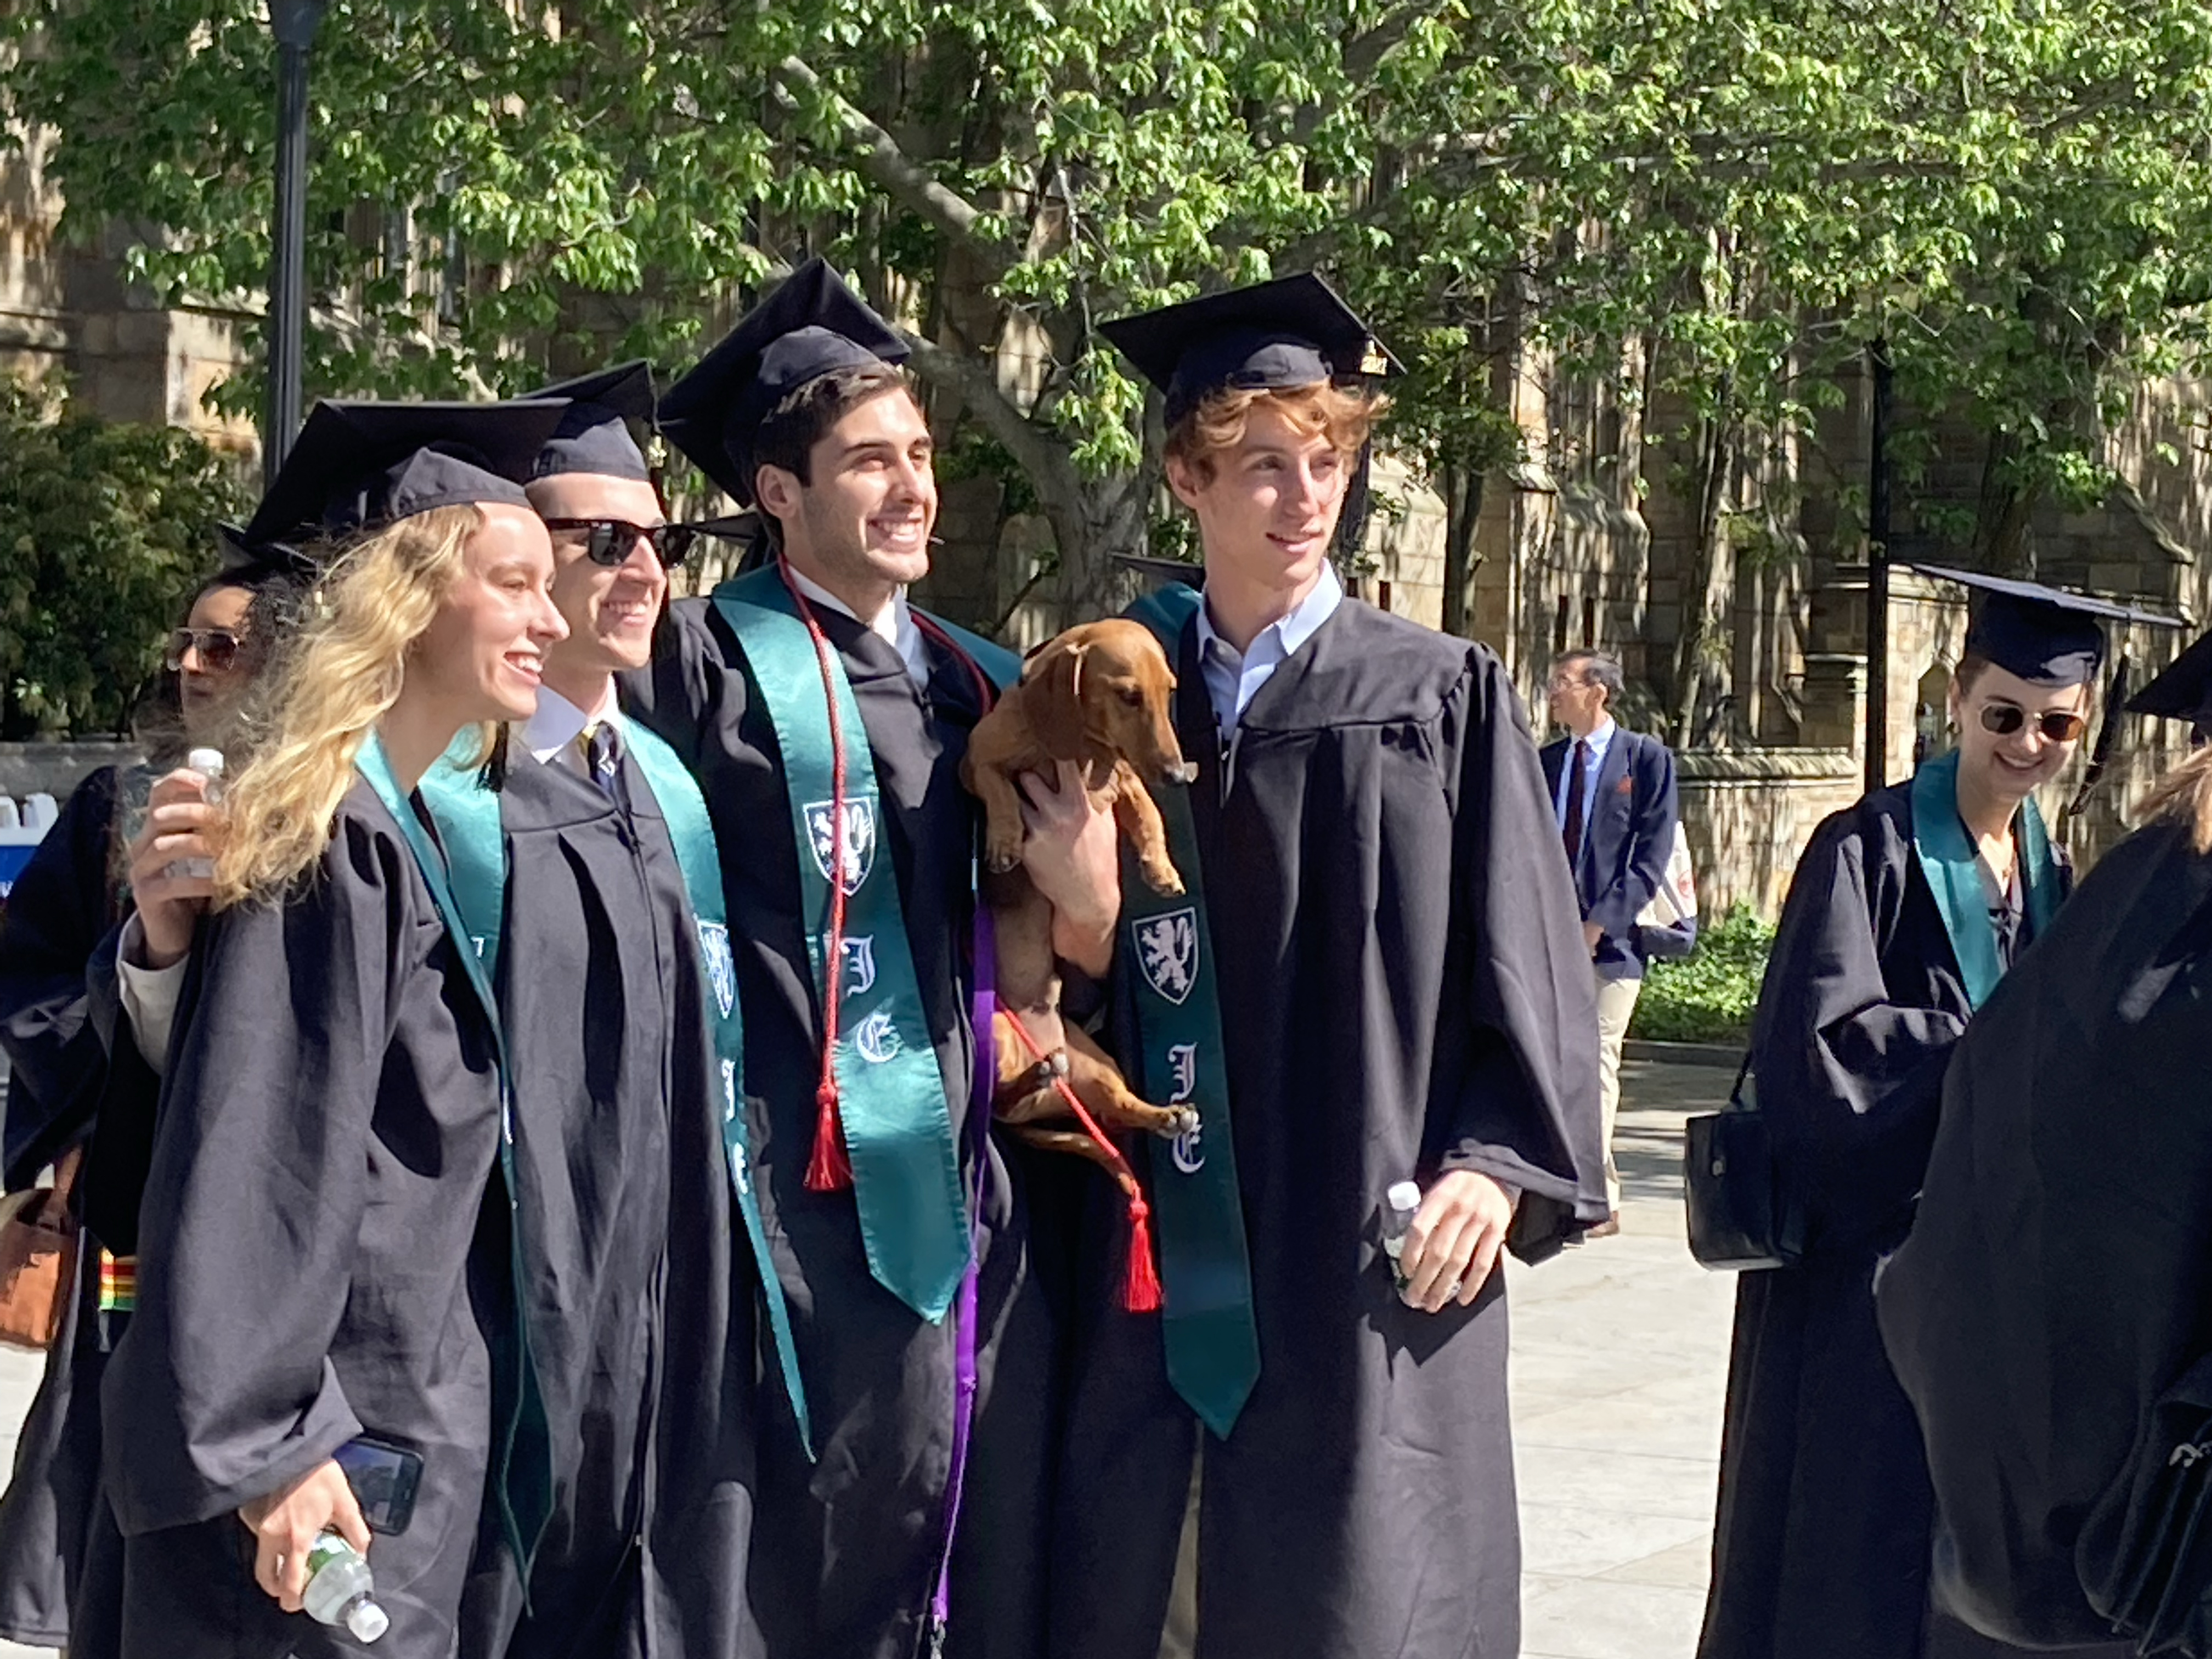 Four graduates--a woman with long blonde hair, a man with sunglasses, a man with brown hair holding a brown dachsund puppy, and a man with red hair, all but dog smiling